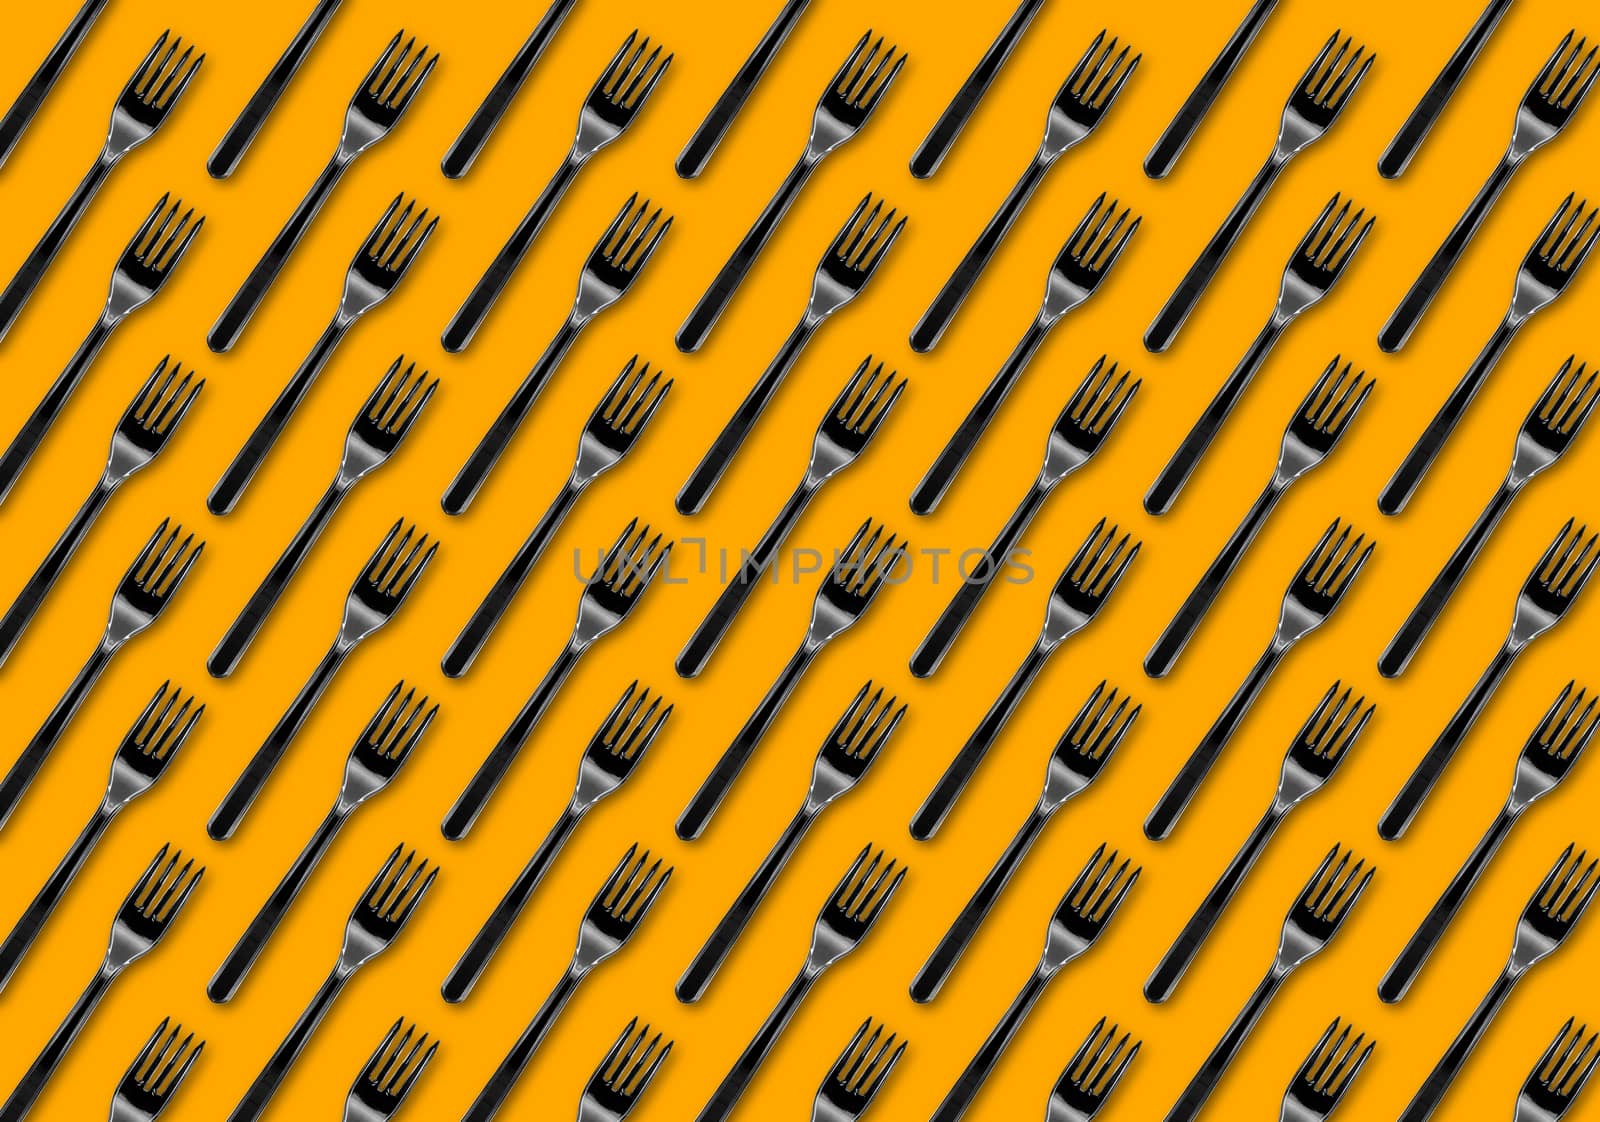 Many black plastic forks on yellow background, top view. Disposable table wear concept. Creative top view pattern.